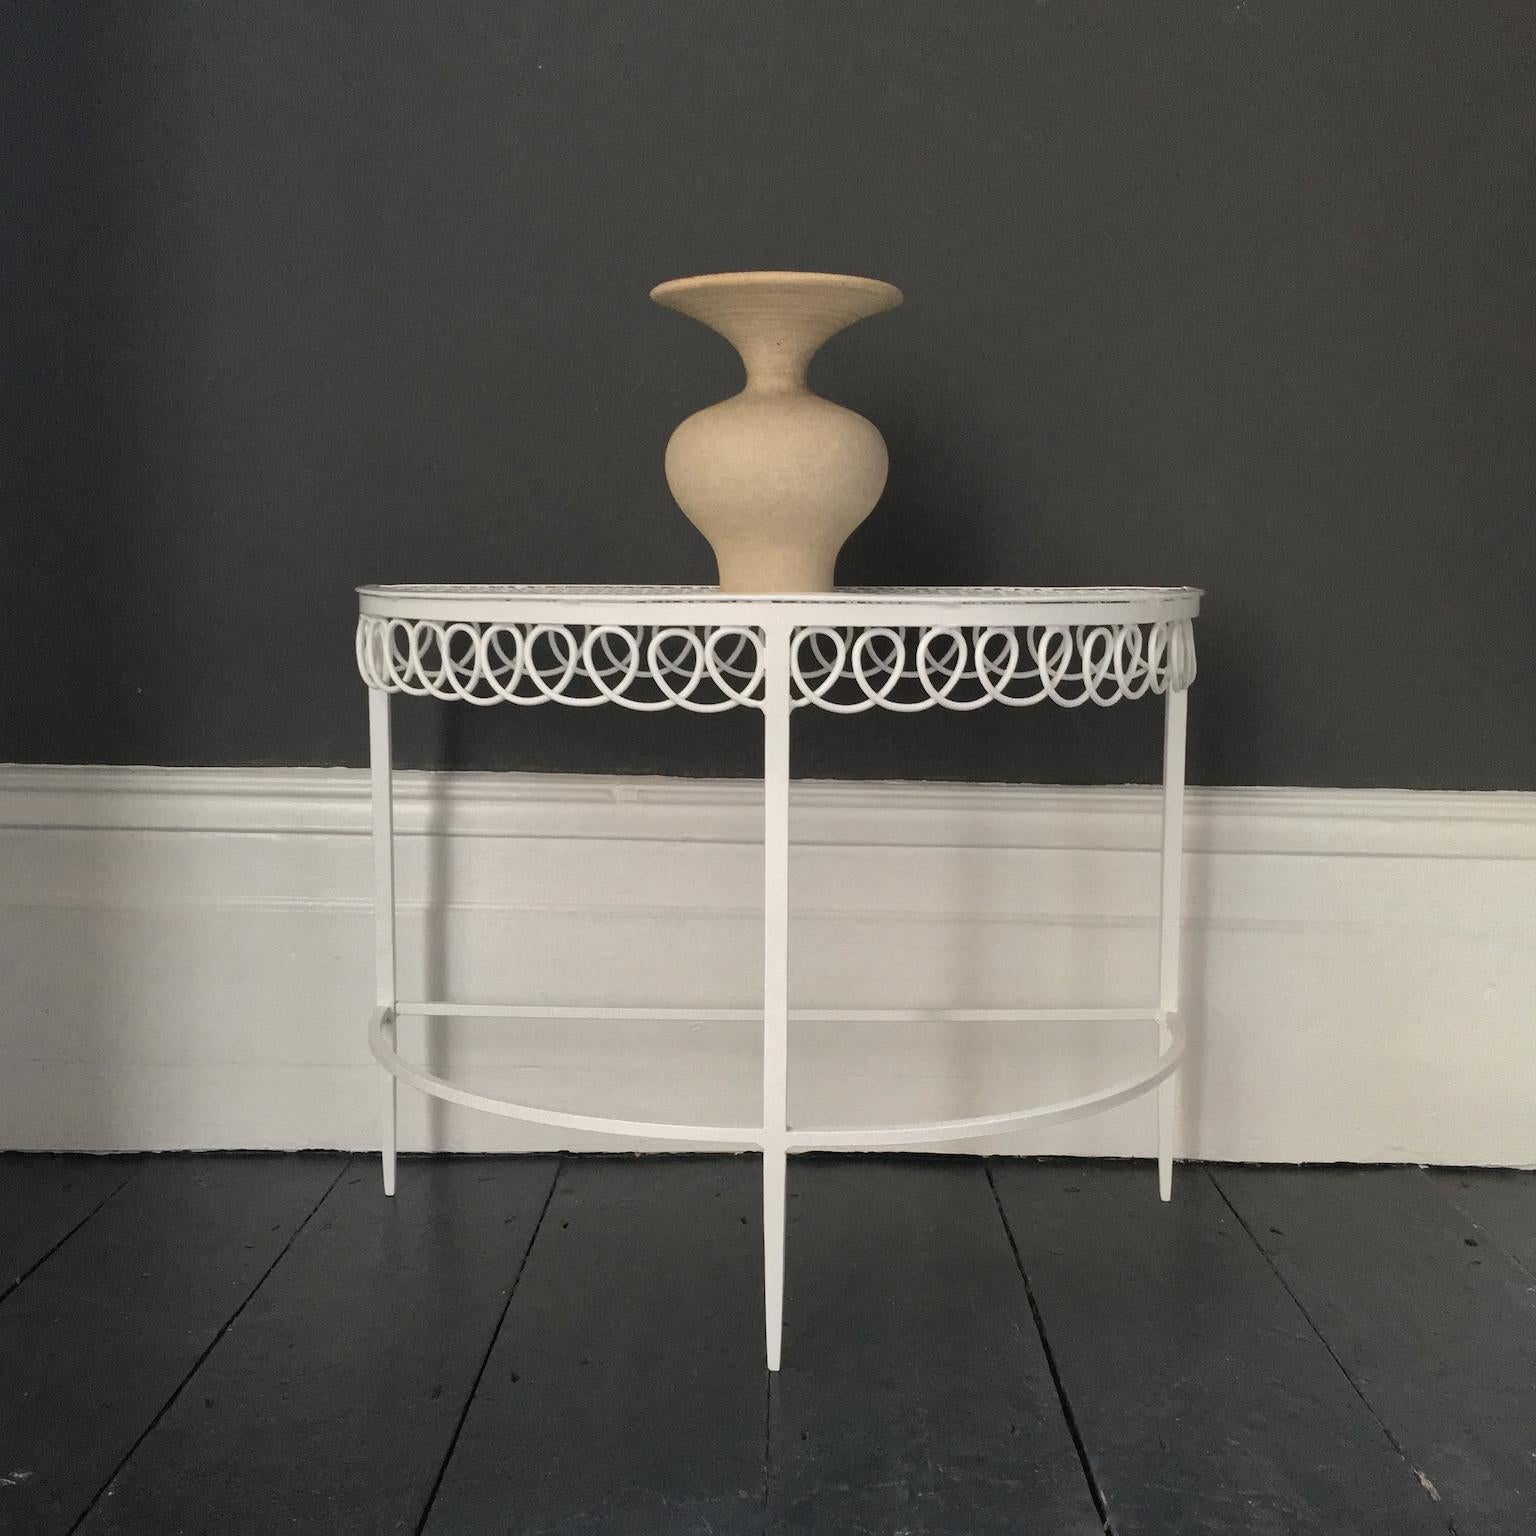 Pair of demilune side tables in white by Matégot, mid-20th century France. The tables can be used separately or pushed together to make a circle. 

Overall the tables are in nice condition and present well. There are some minor flaws visible from